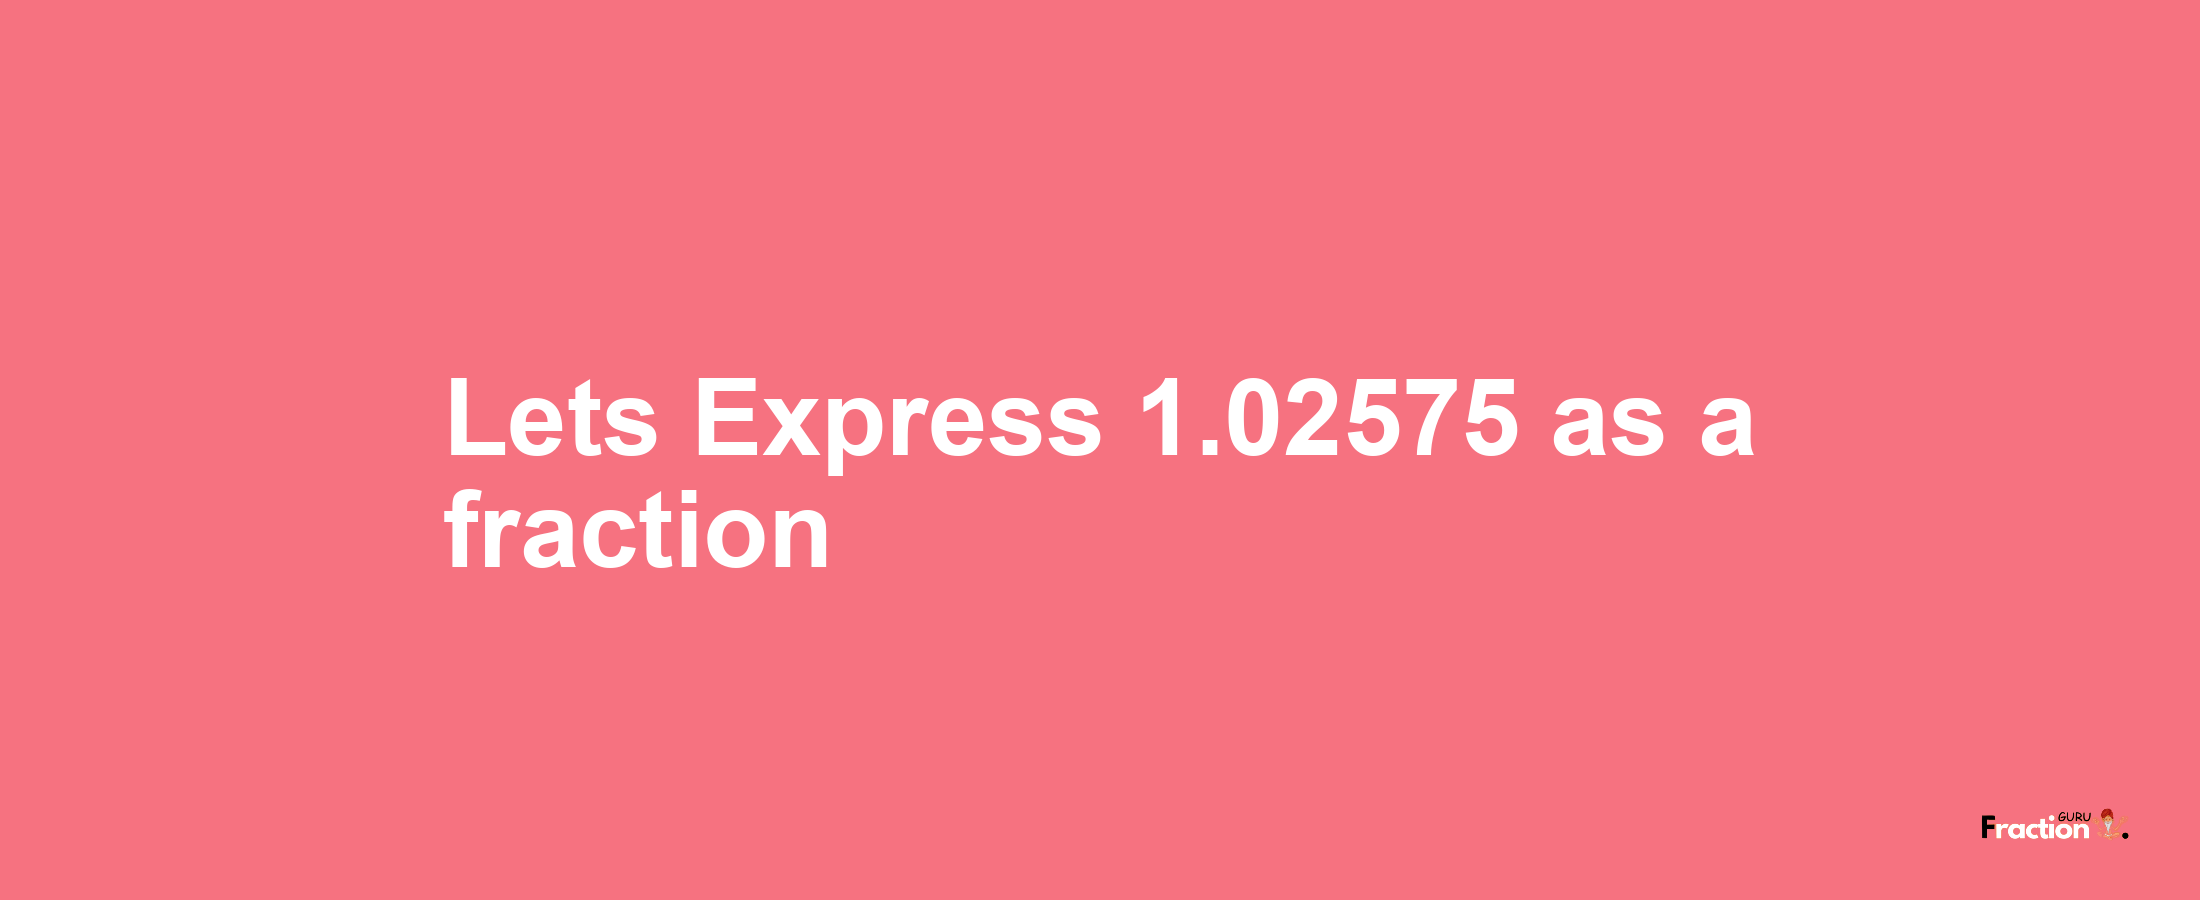 Lets Express 1.02575 as afraction